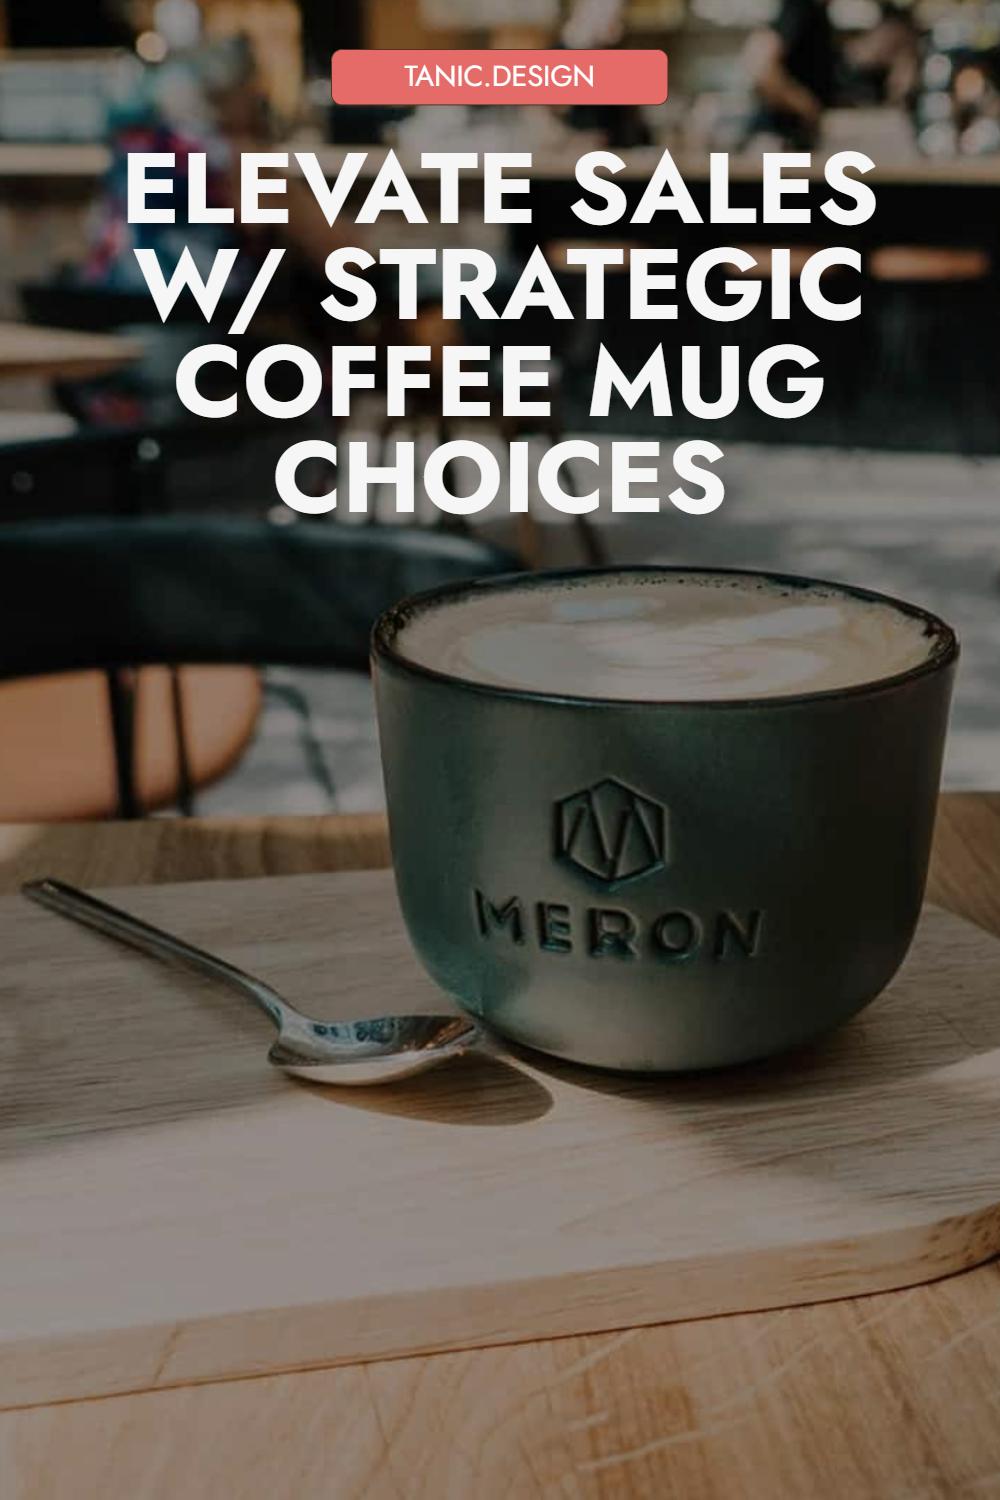 Selecting the right coffee mug can significantly boost your sales